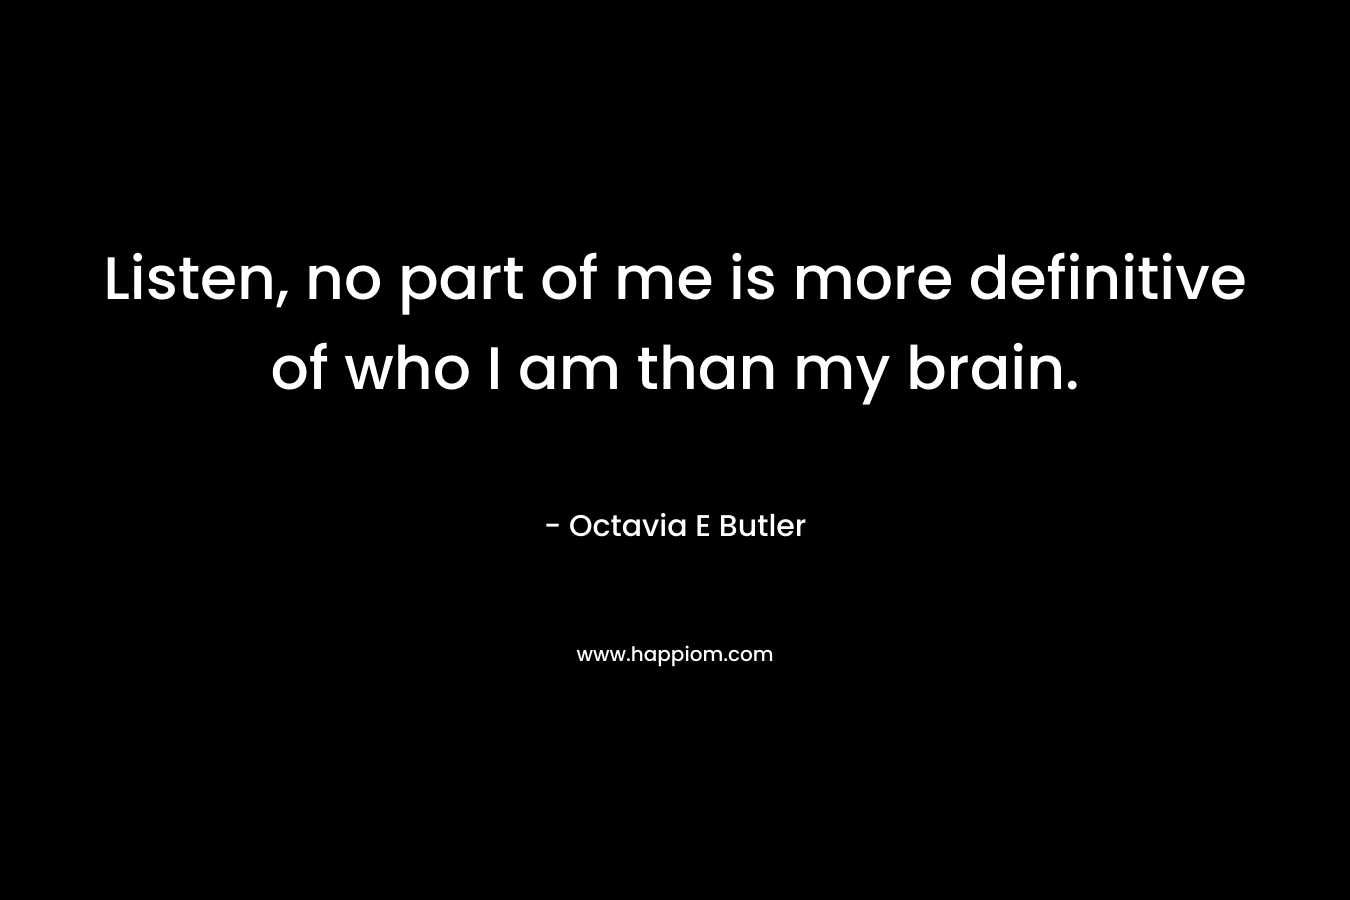 Listen, no part of me is more definitive of who I am than my brain. – Octavia E Butler